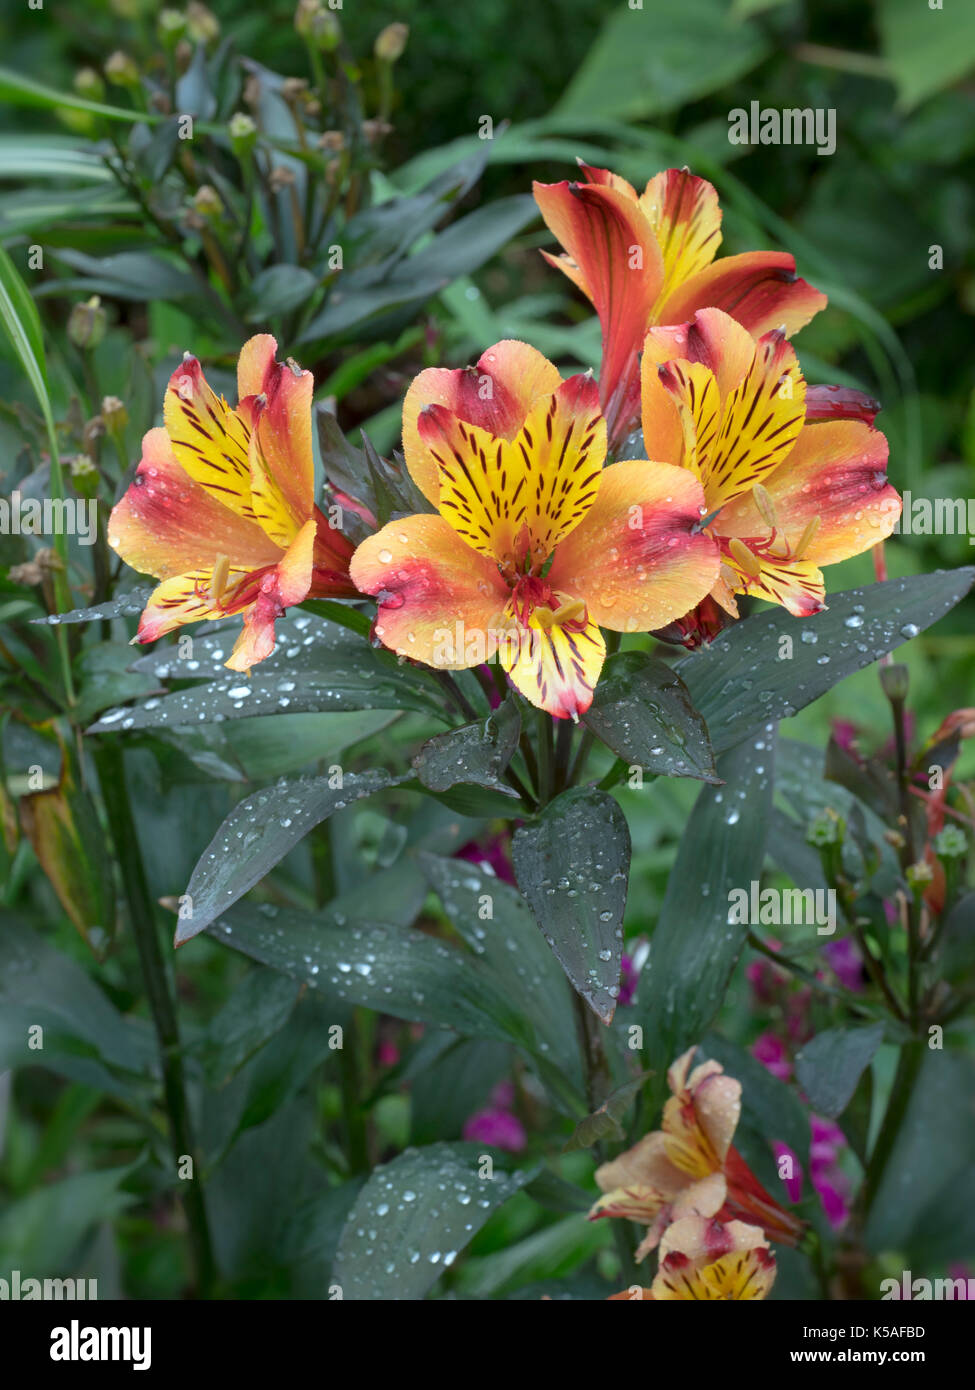 Alstroemeria Golden Delight commonly called the Peruvian lily or lily of the Incas Stock Photo